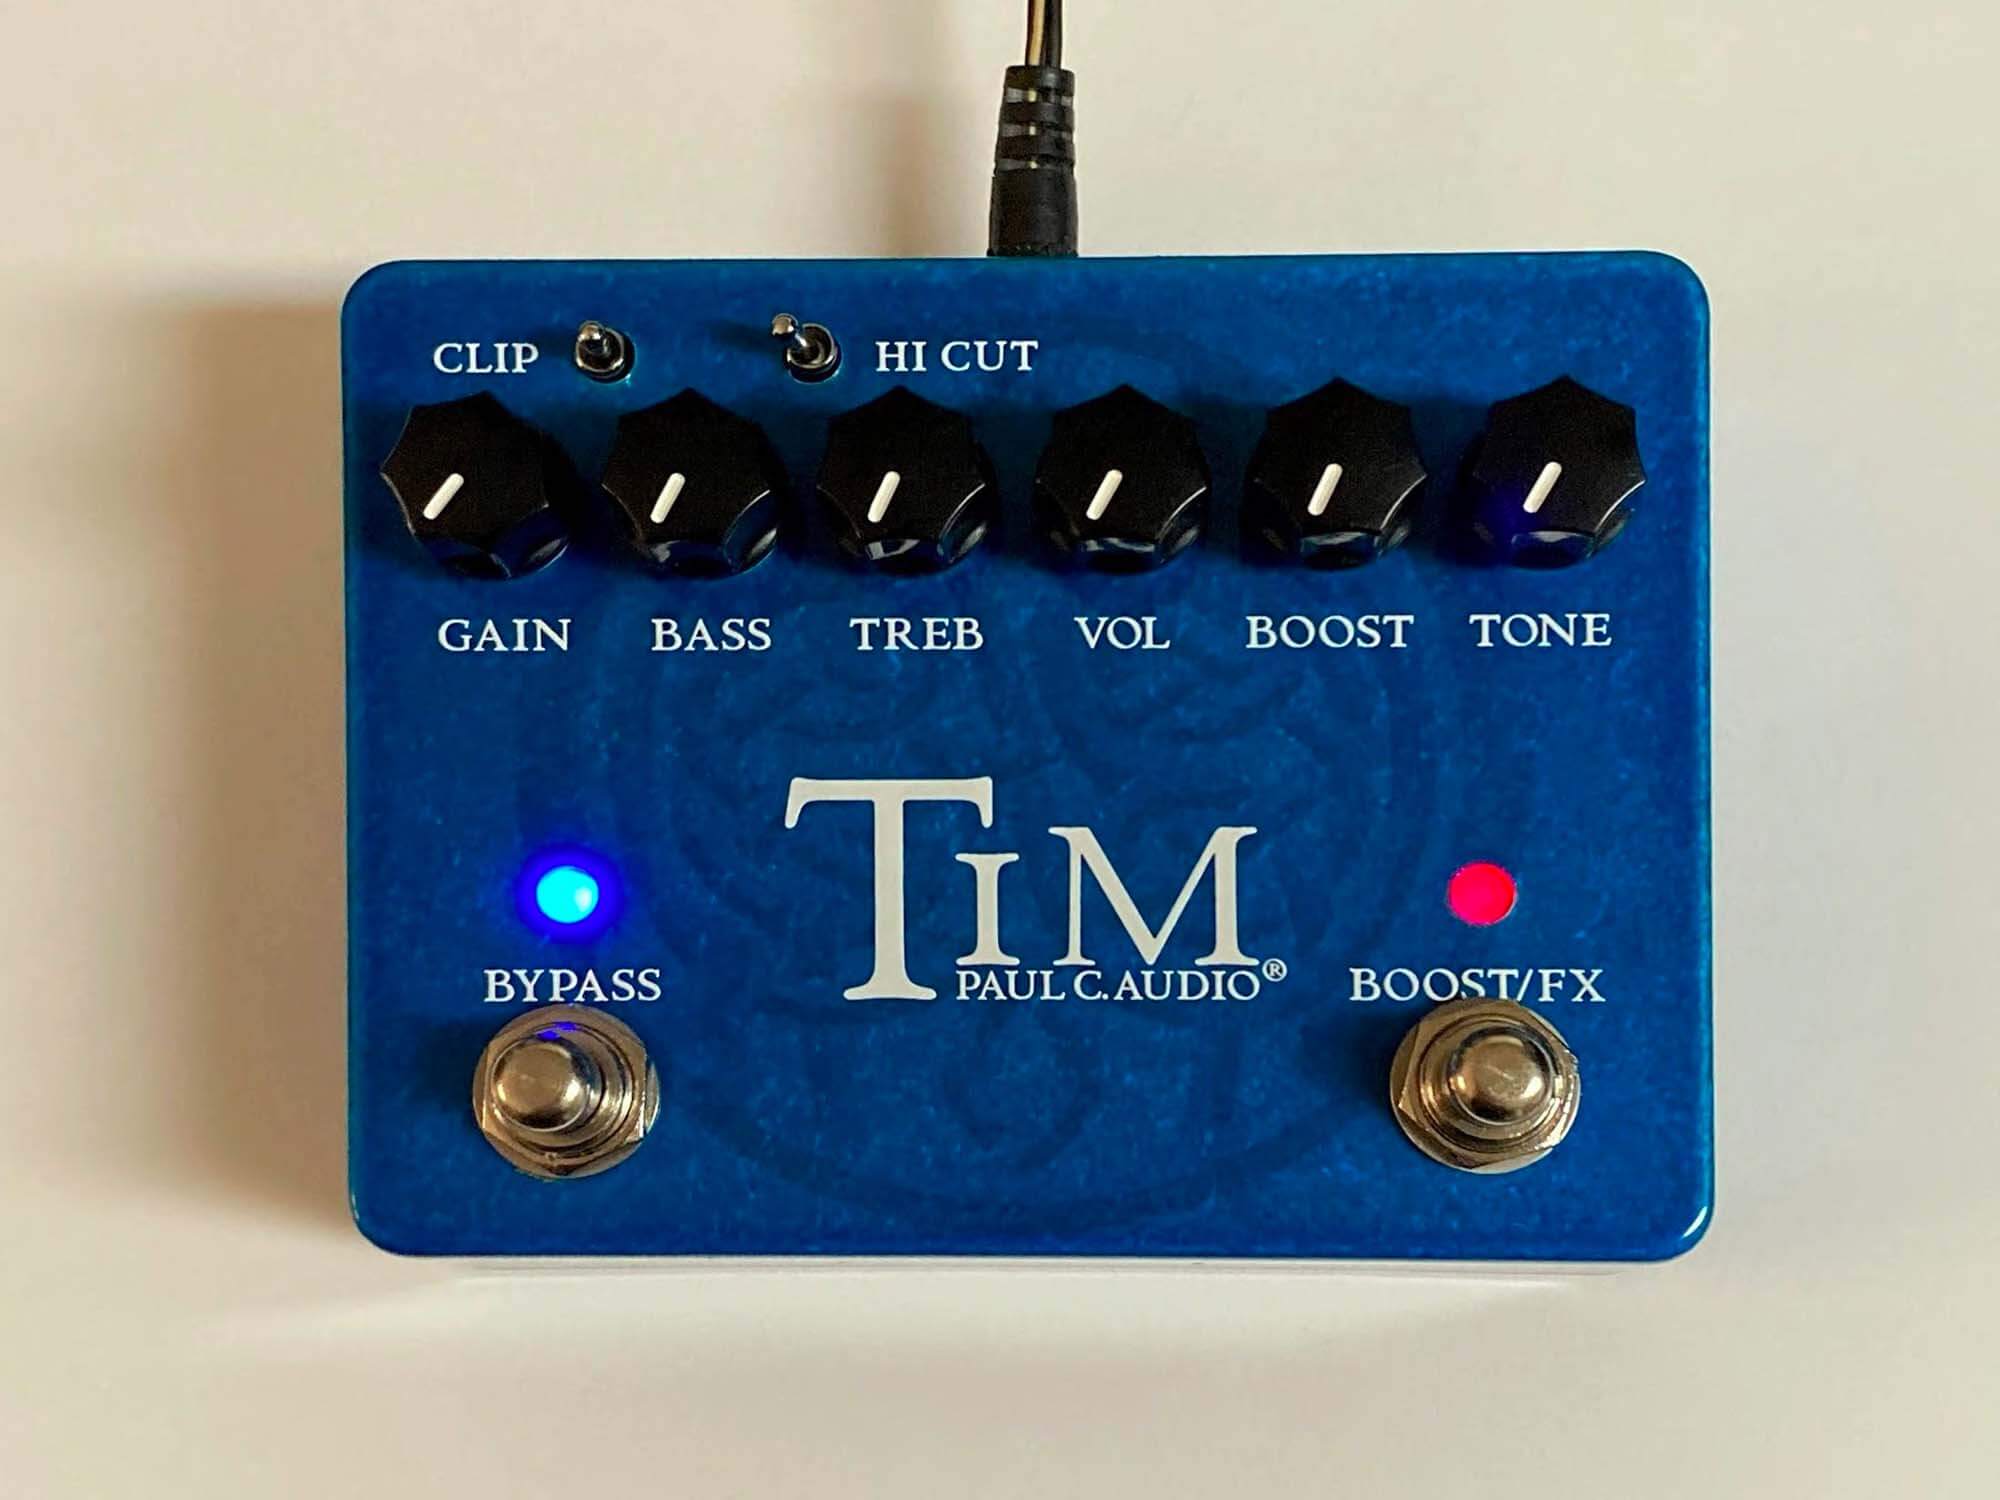 Paul Cochrane teases a new Tim overdrive: “With luck I'm hoping it 